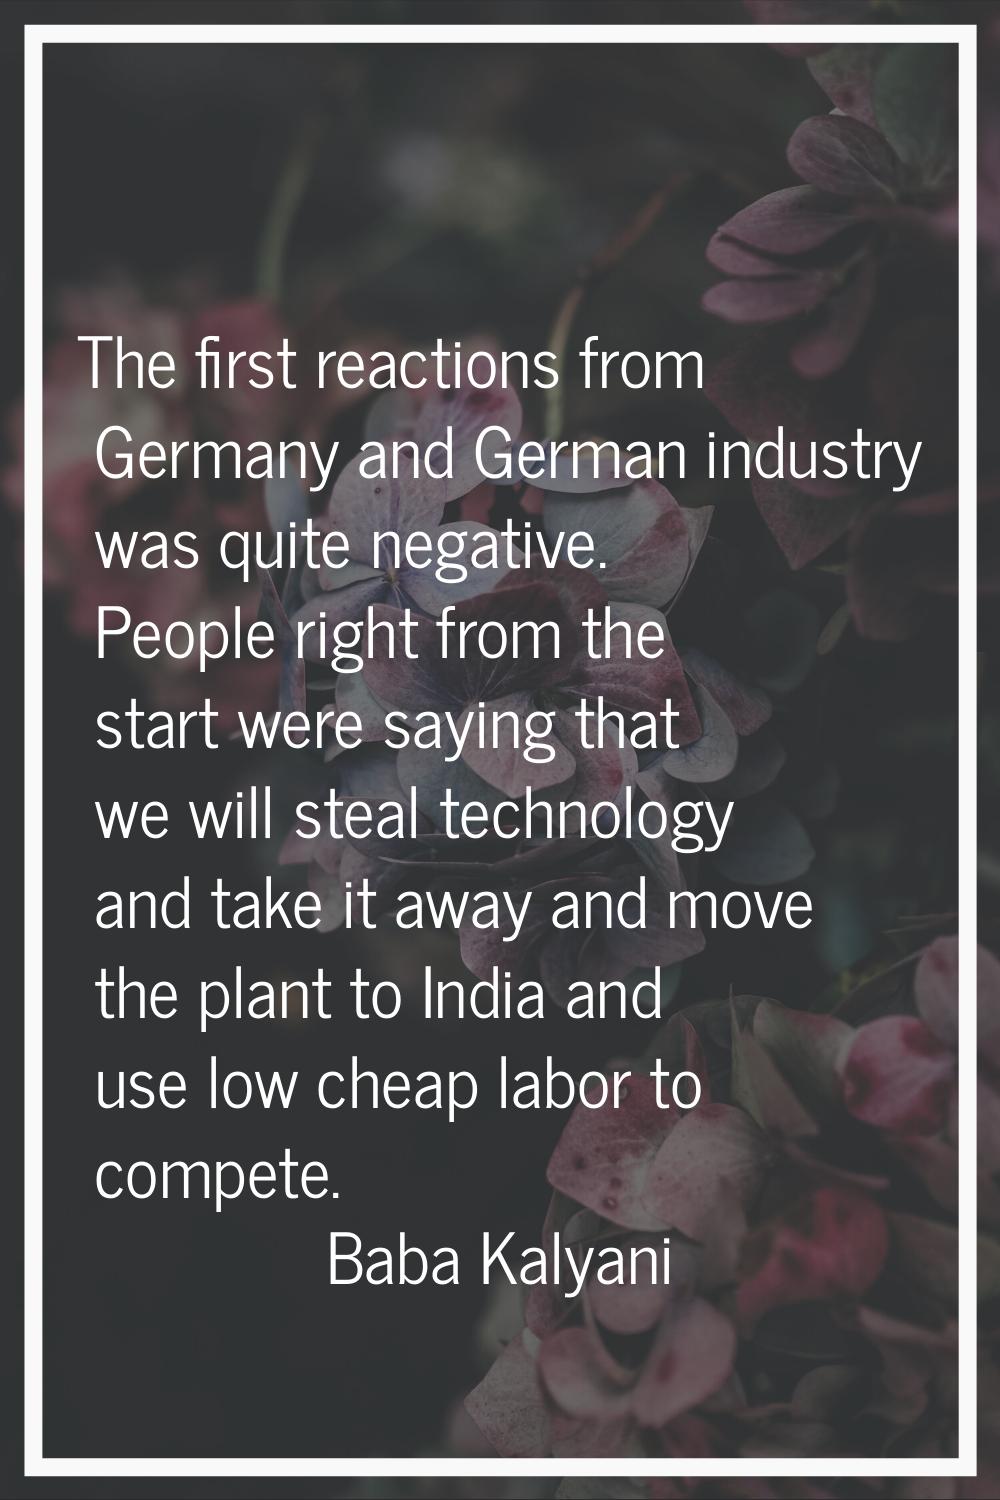 The first reactions from Germany and German industry was quite negative. People right from the star